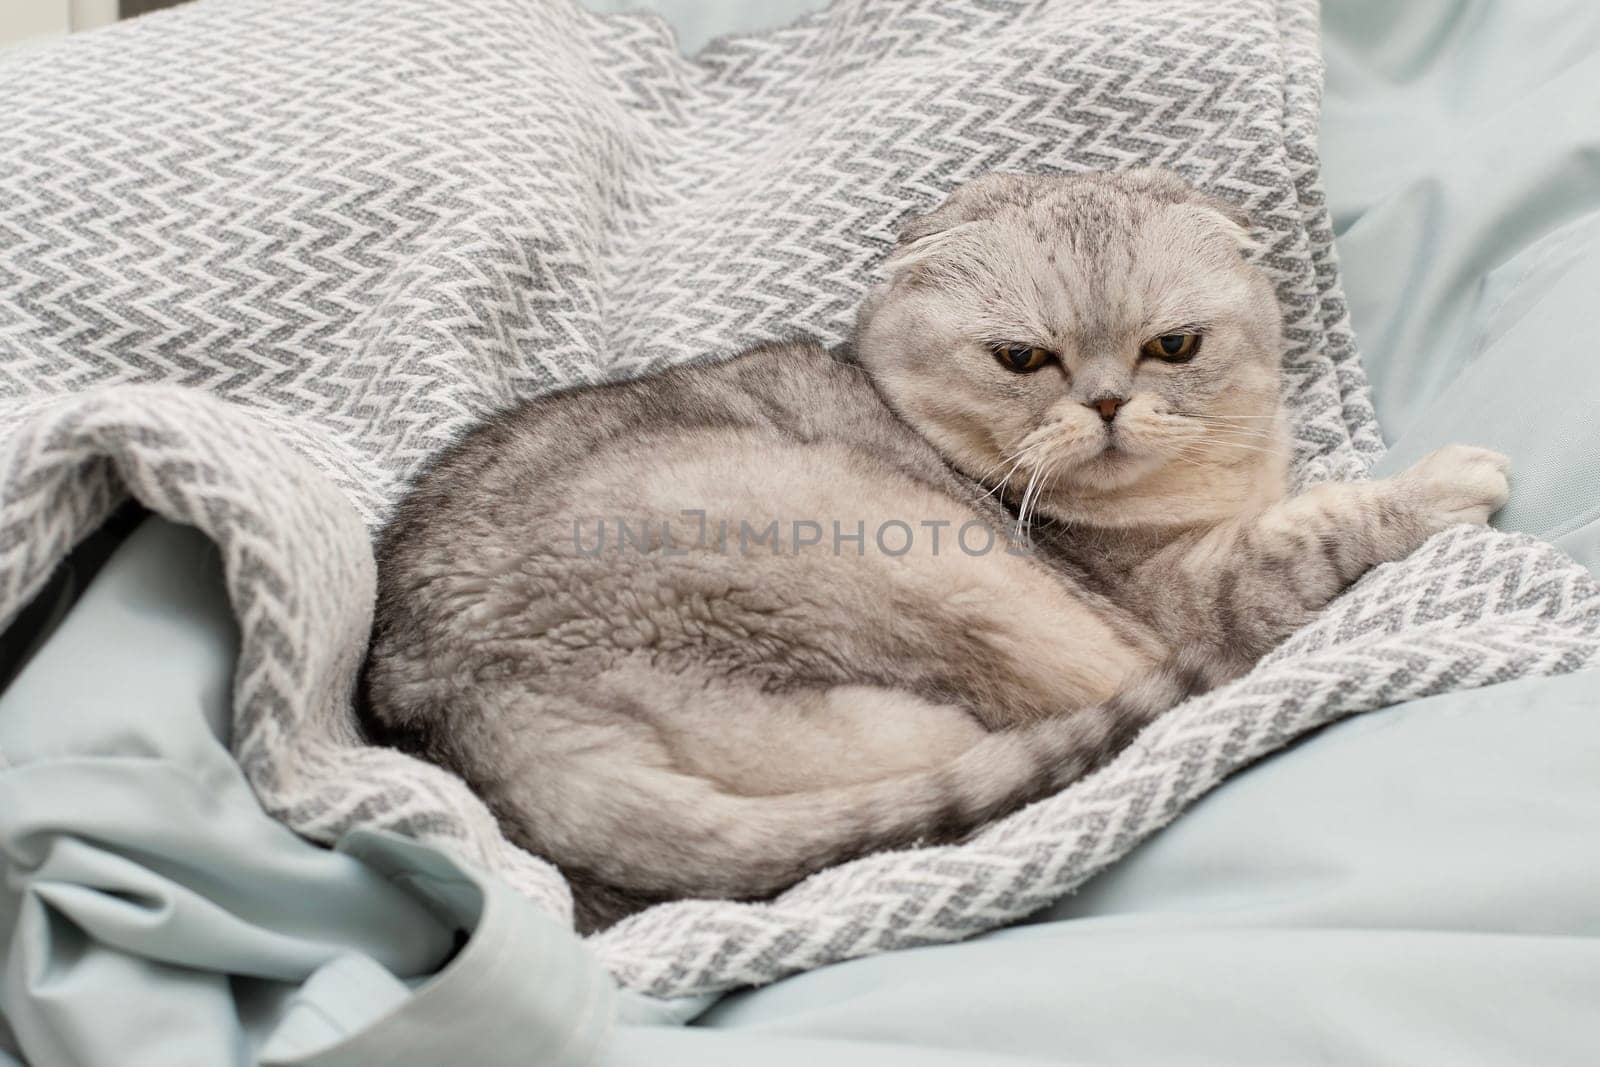 Pets. A beautiful, important gray cat of the Scottish Fold breed lies on a blanket in a home interior. Close-up.